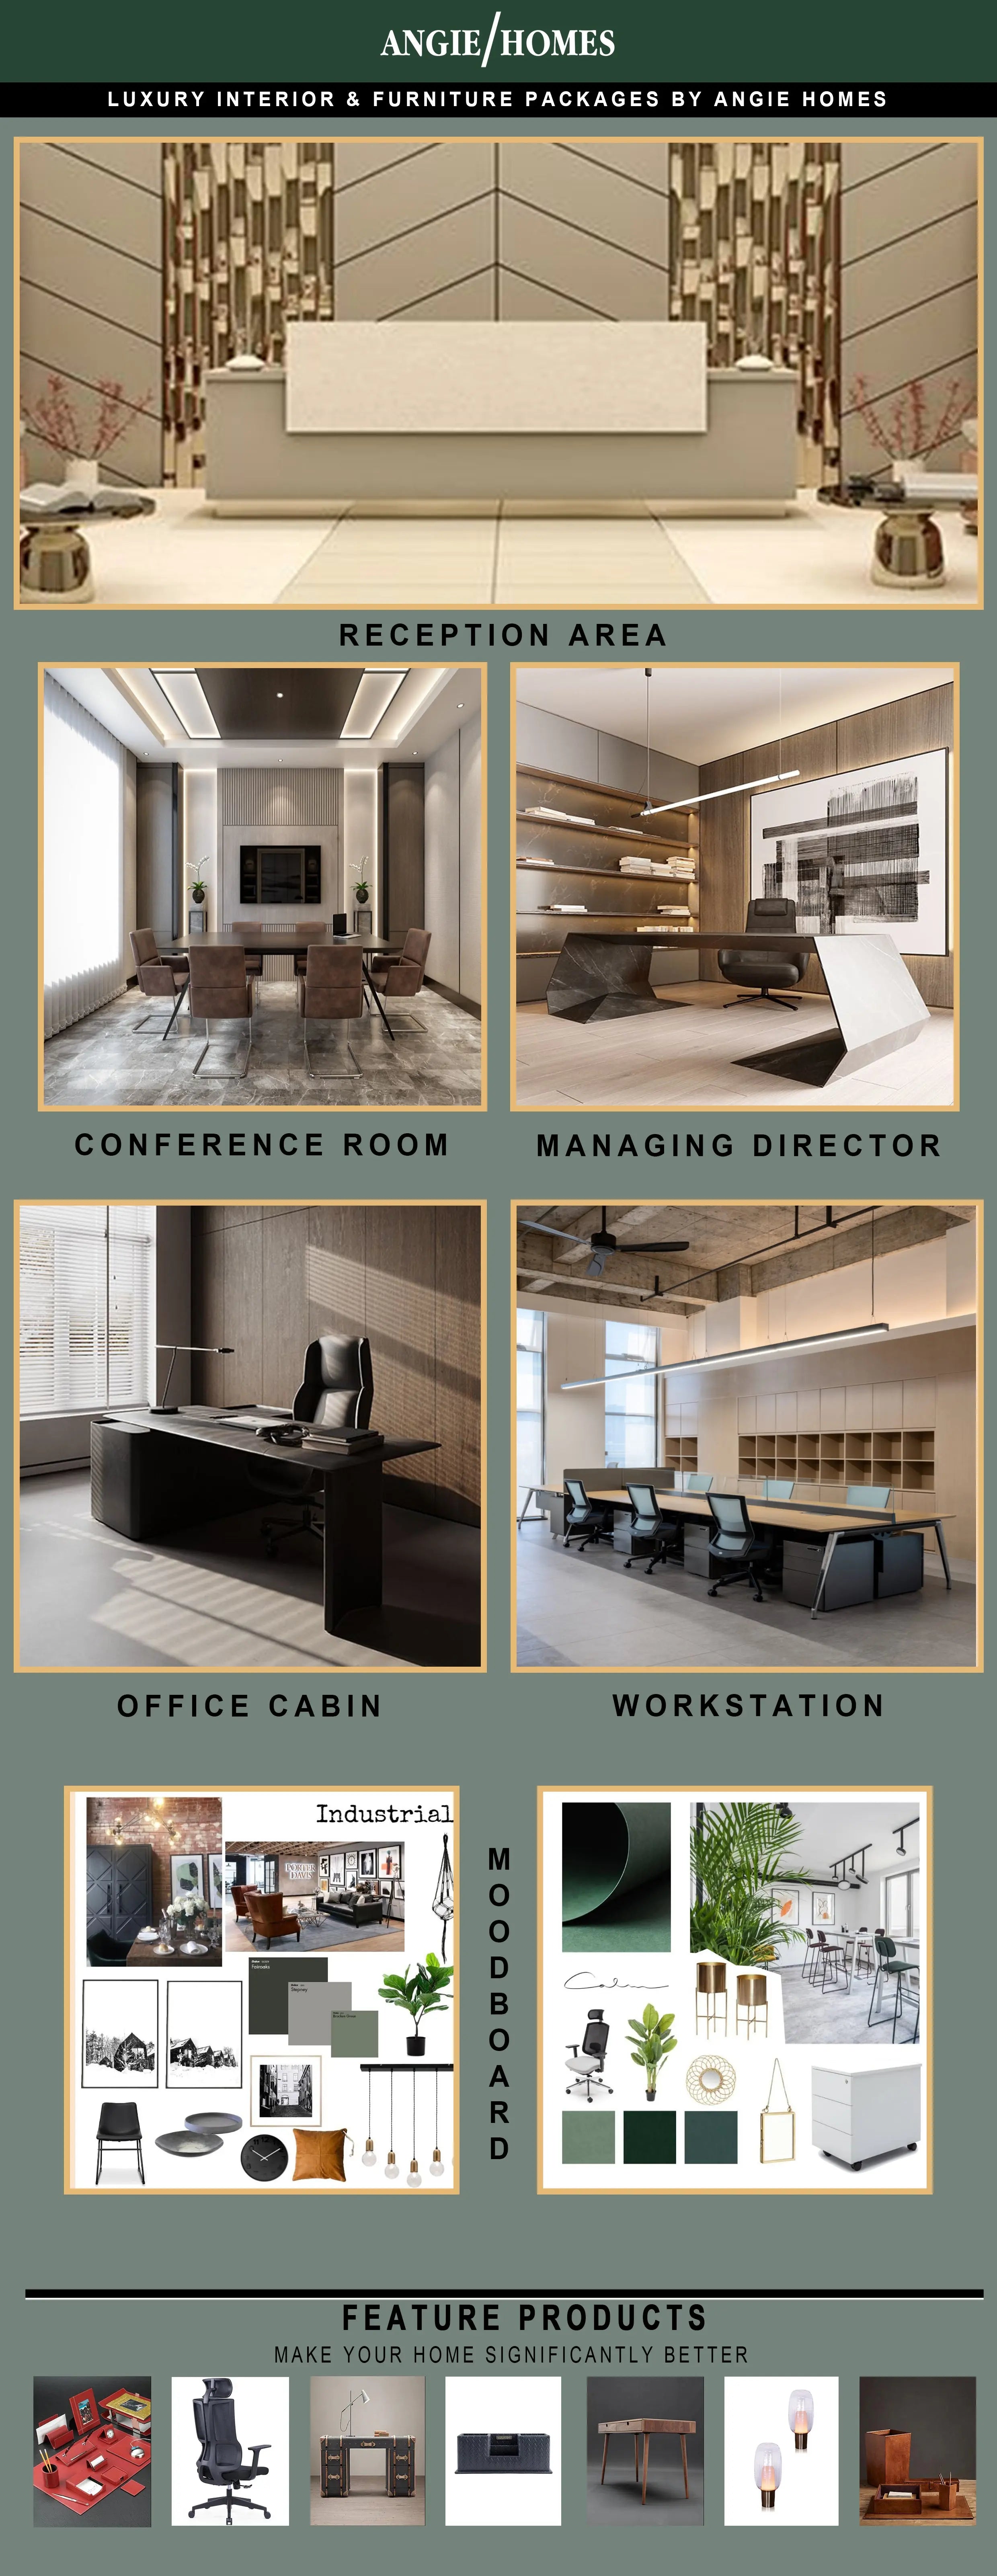 Manchester Small Office Interiors ANGIE HOMES